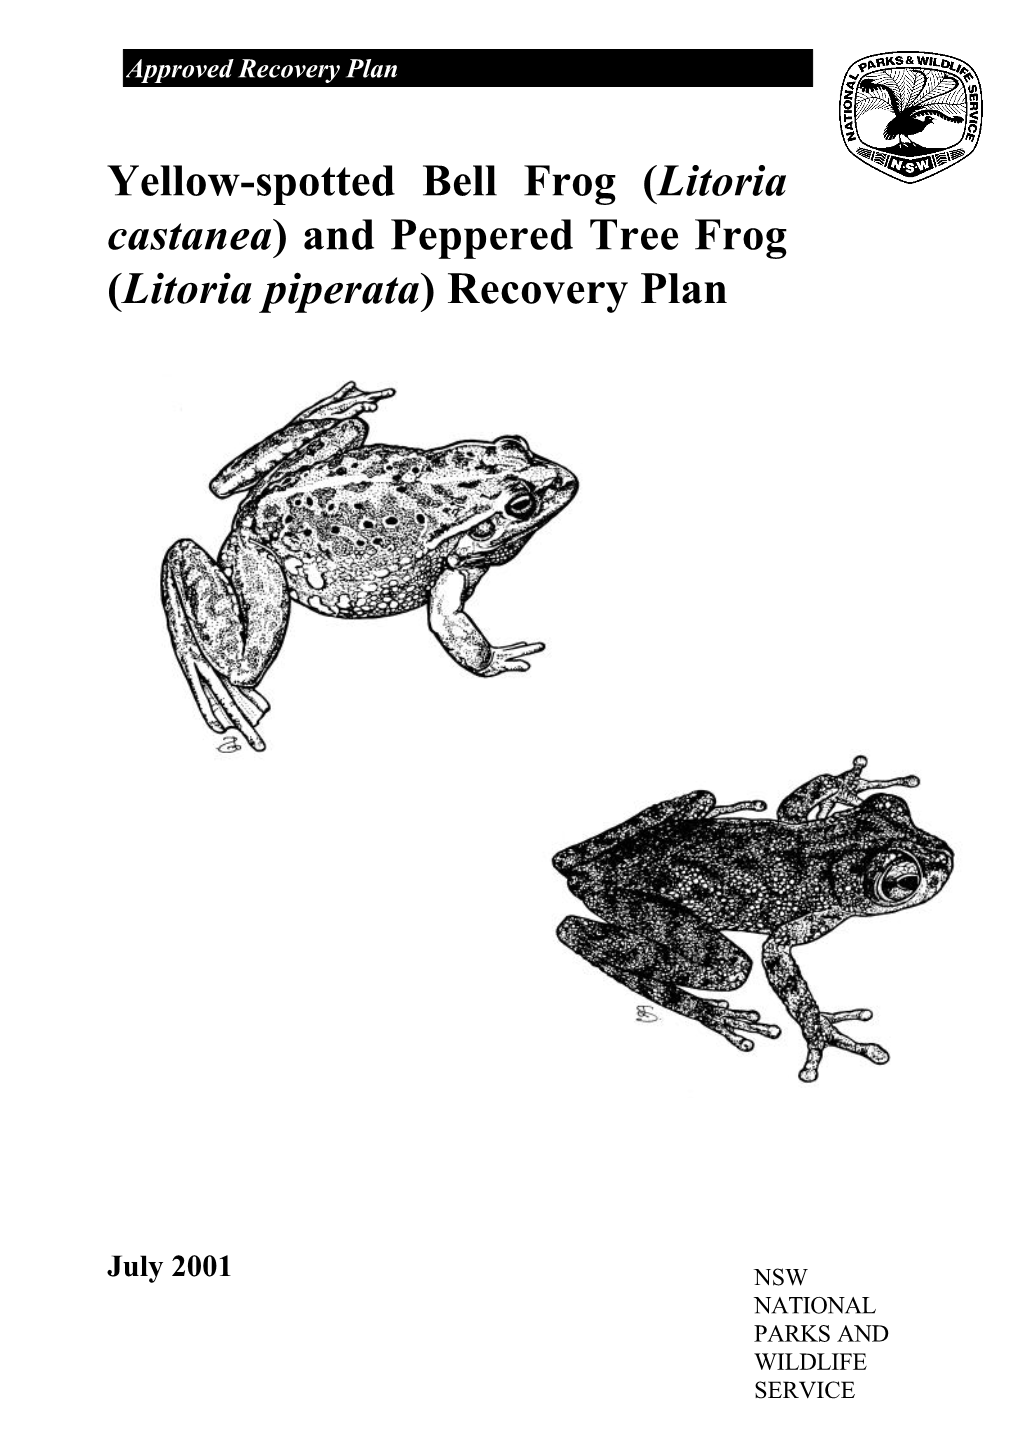 And Peppered Tree Frog (Litoria Piperata) Recovery Plan